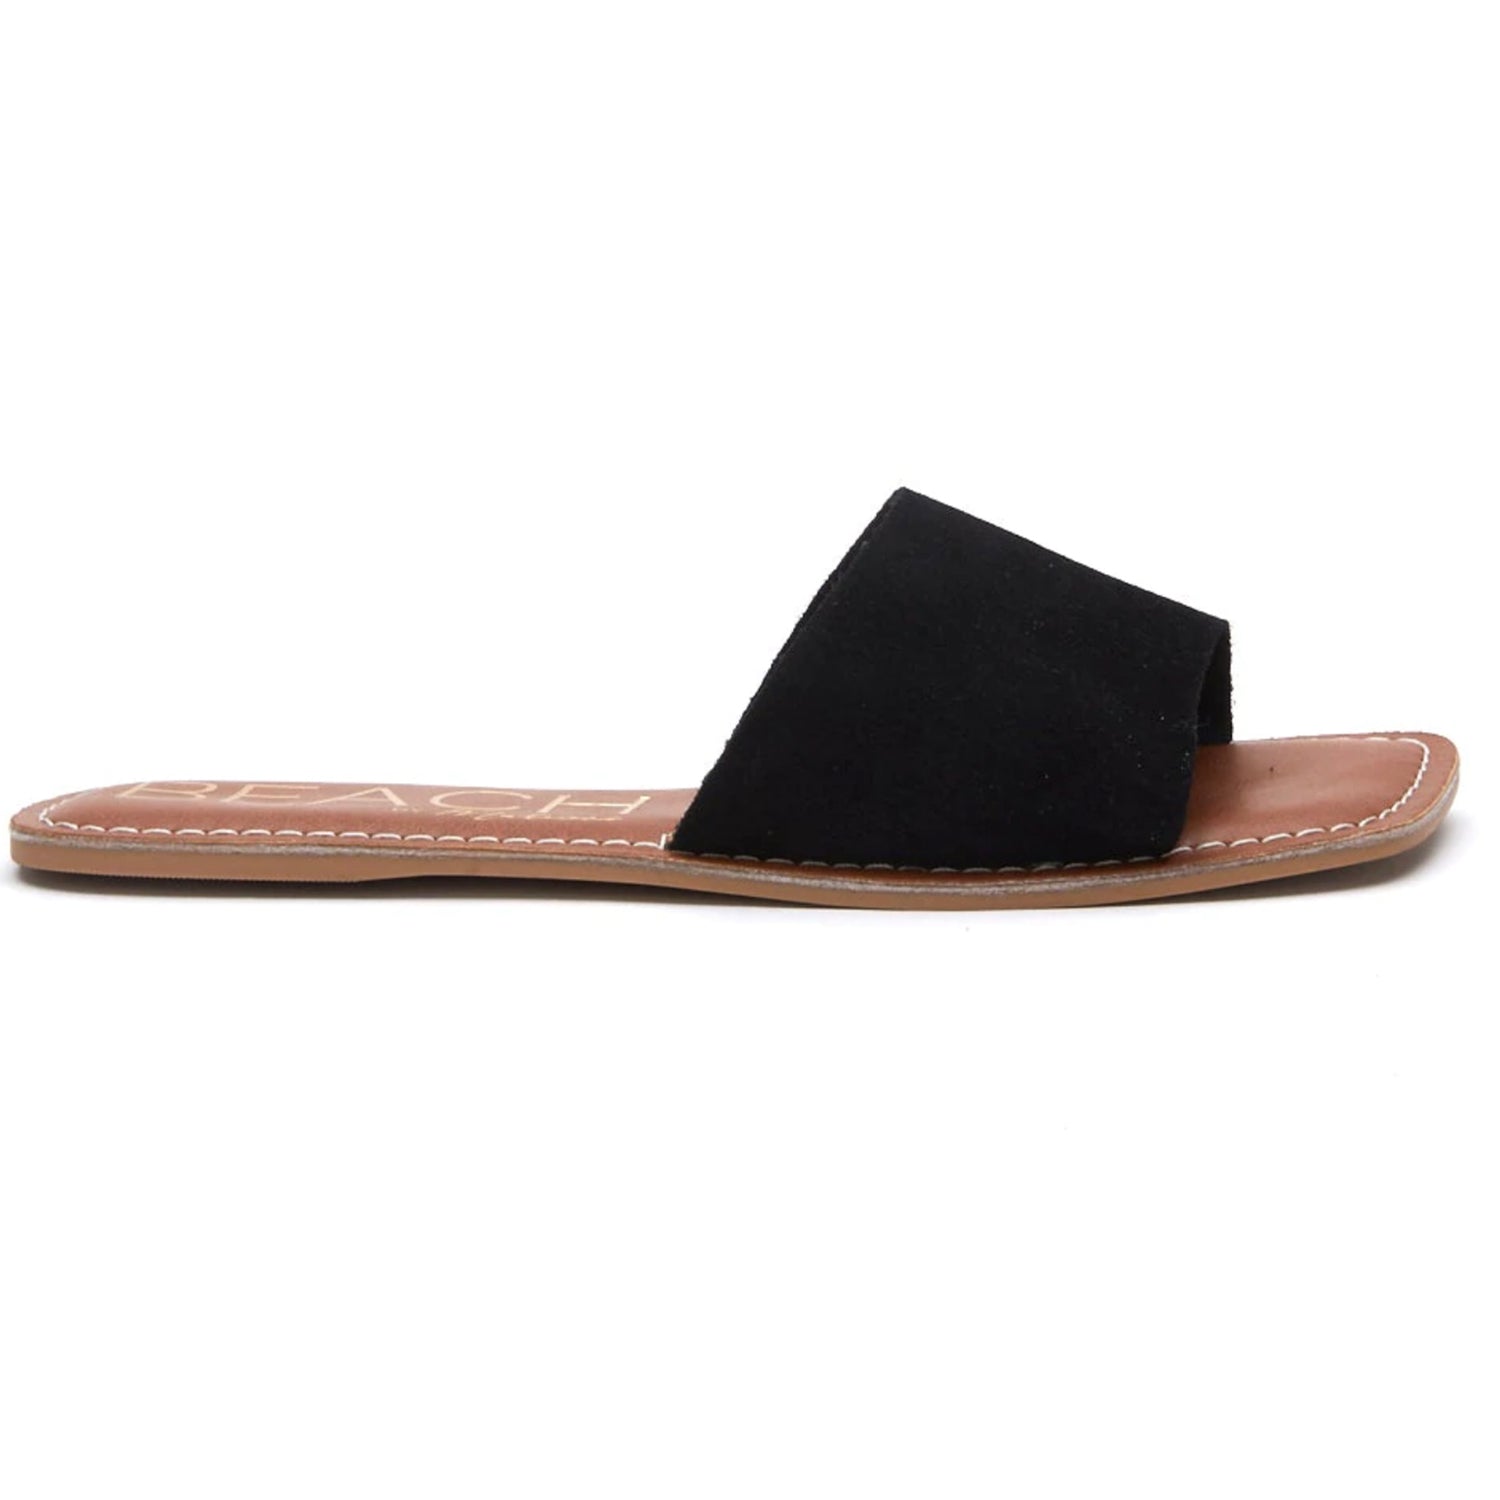 Bali Sandal. The Bali Slide Sandals are a wardrobe essential. Featuring a classic one-band slide sandal in gold suede or black, complete with a cushioned footbed and a squared off toe